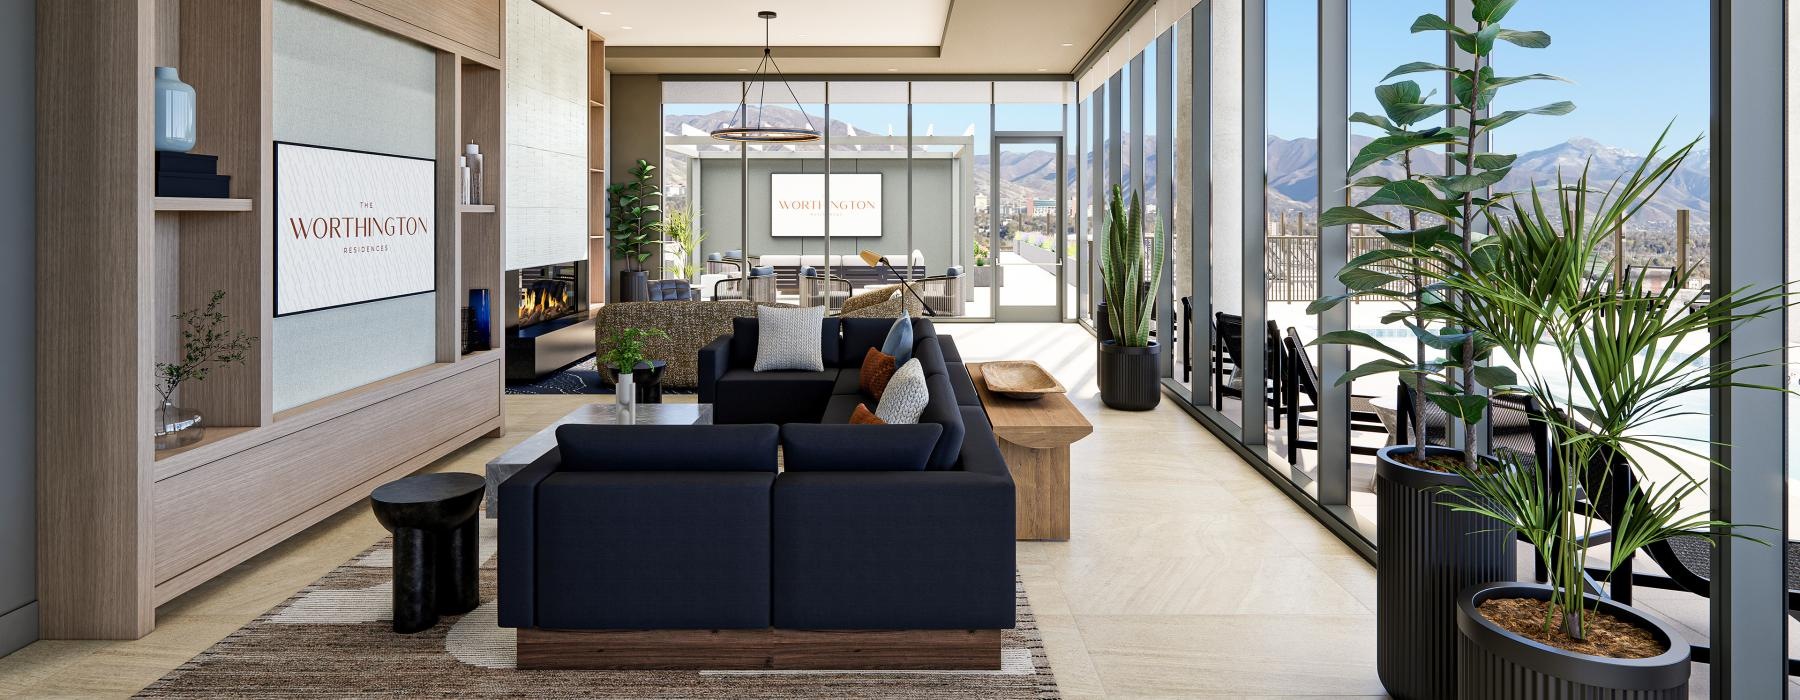 large sectional facing tv in bright clubhouse